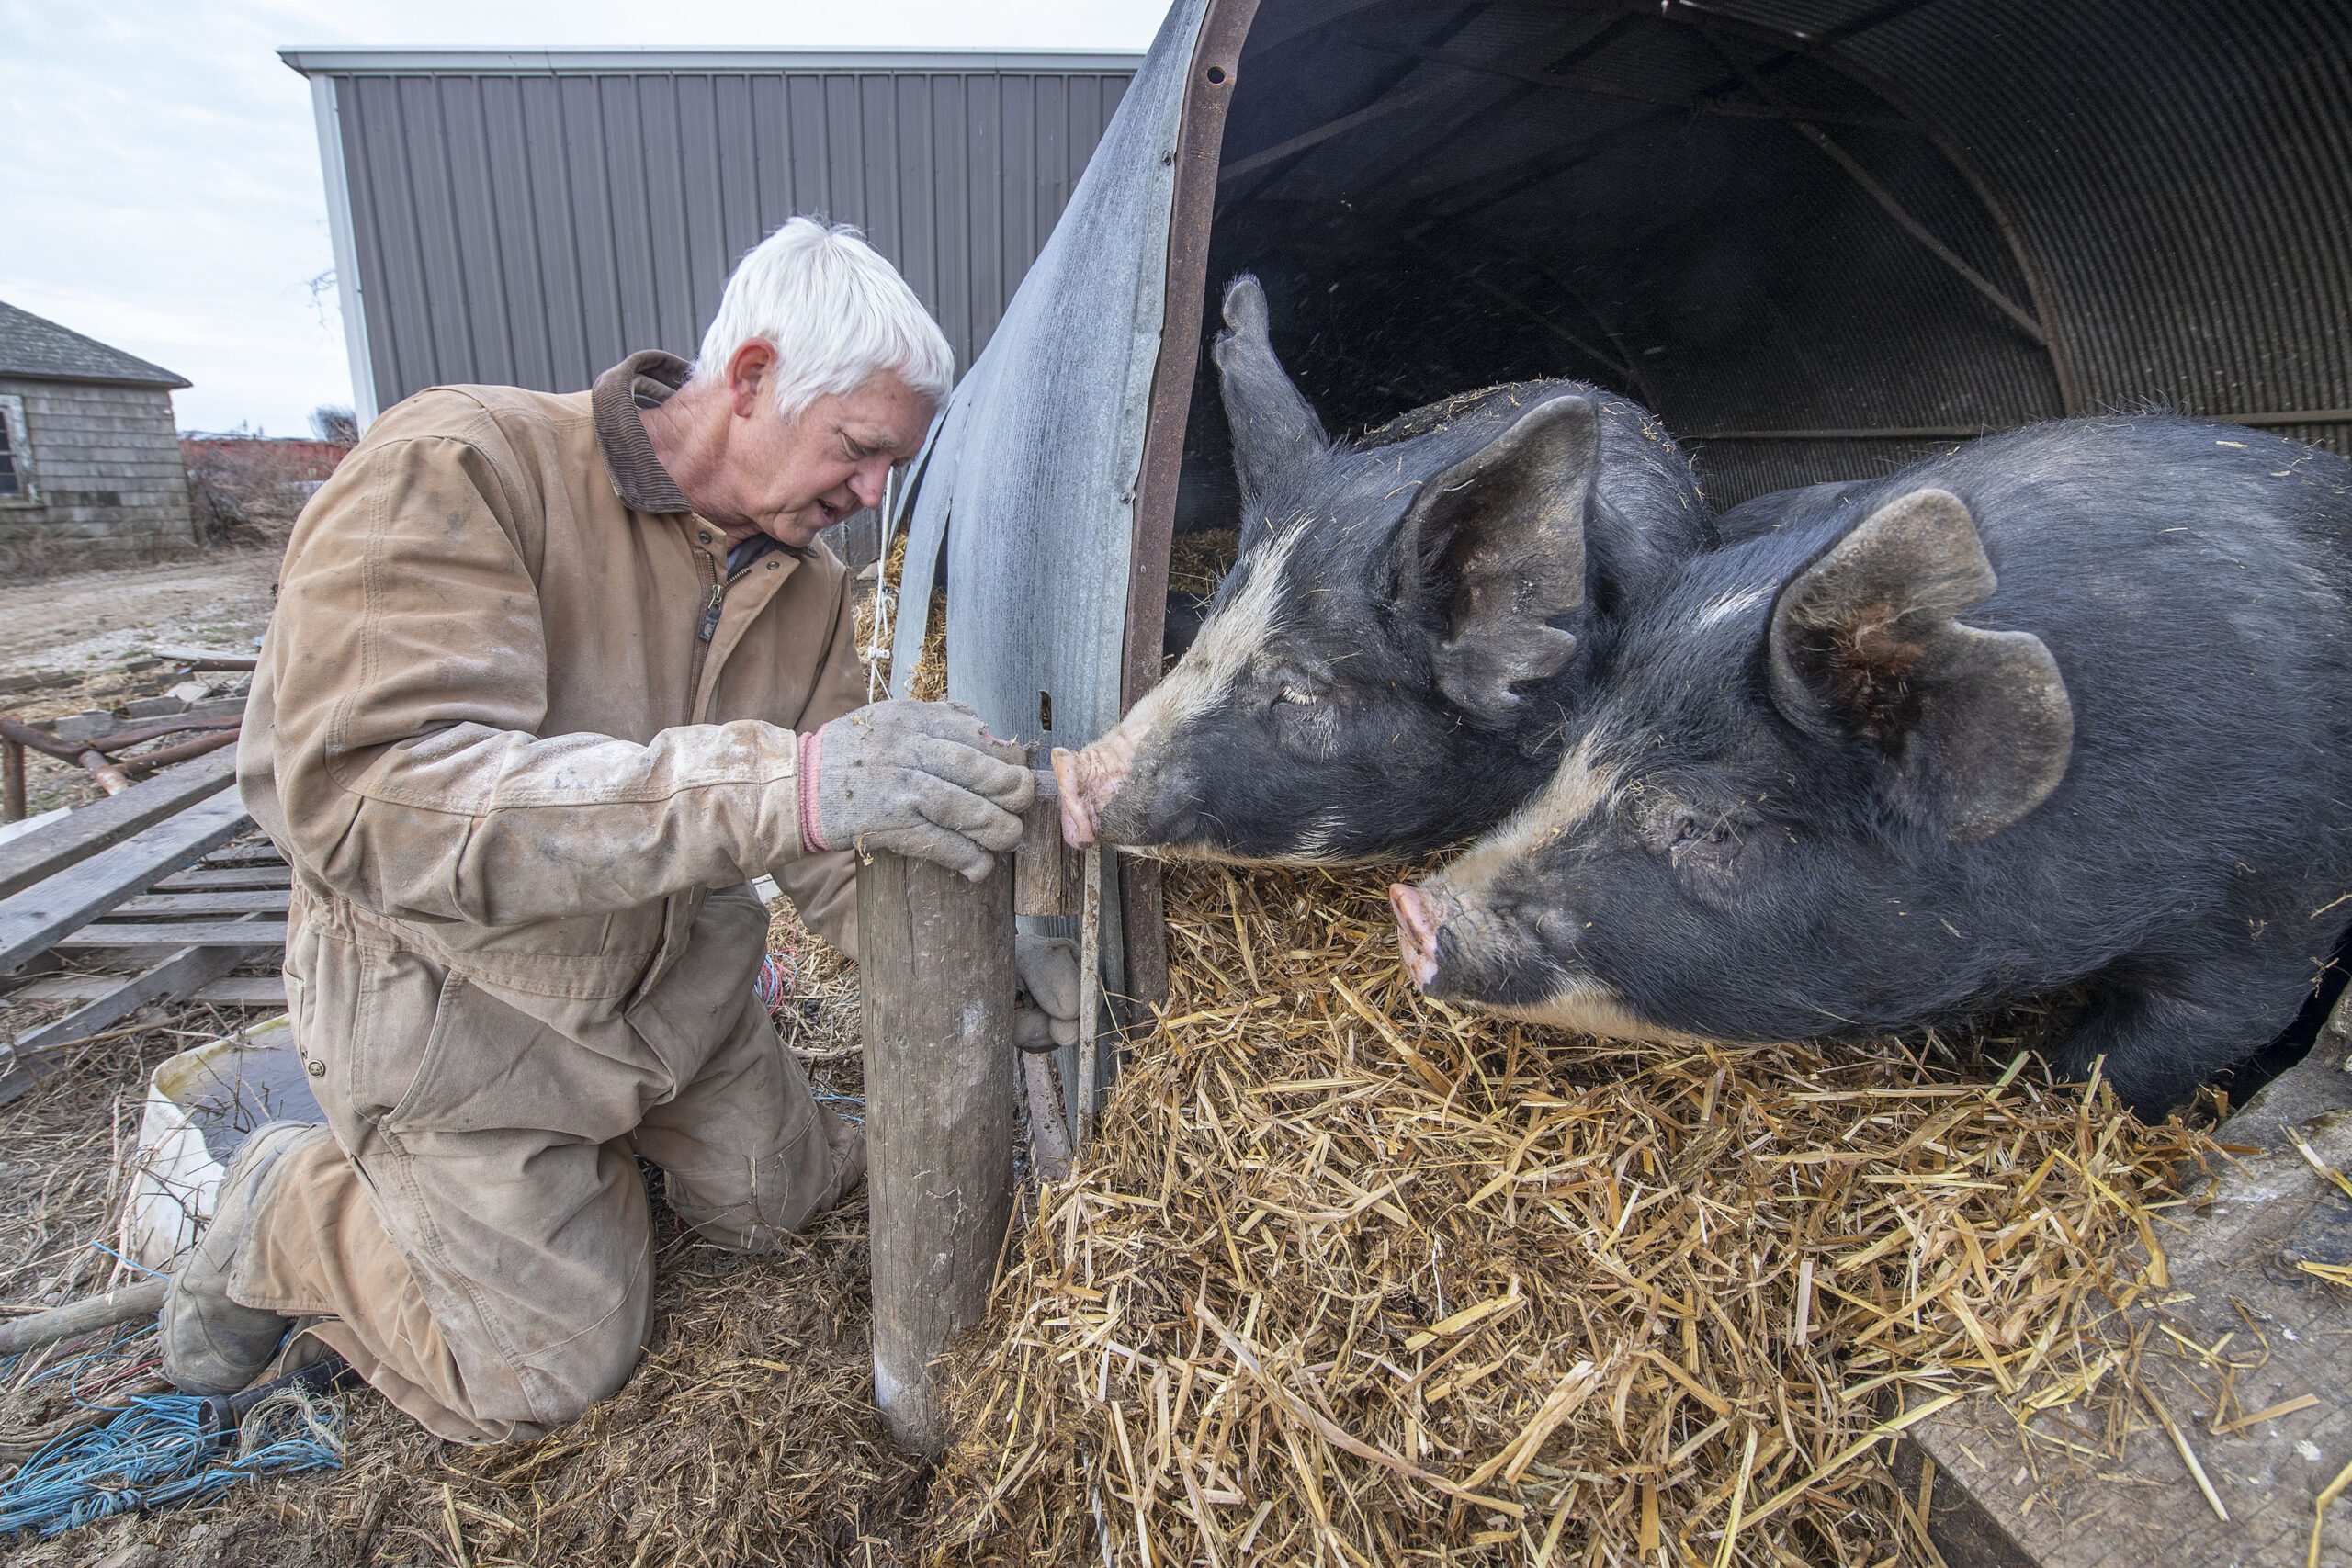 Mecox Bay Dairy Proprietor Art Ludlow gets some company from his pigs - who are naturally curious creatures - as he works to fix a problem with the electric fence surrounding their pen on March 1st, 2022